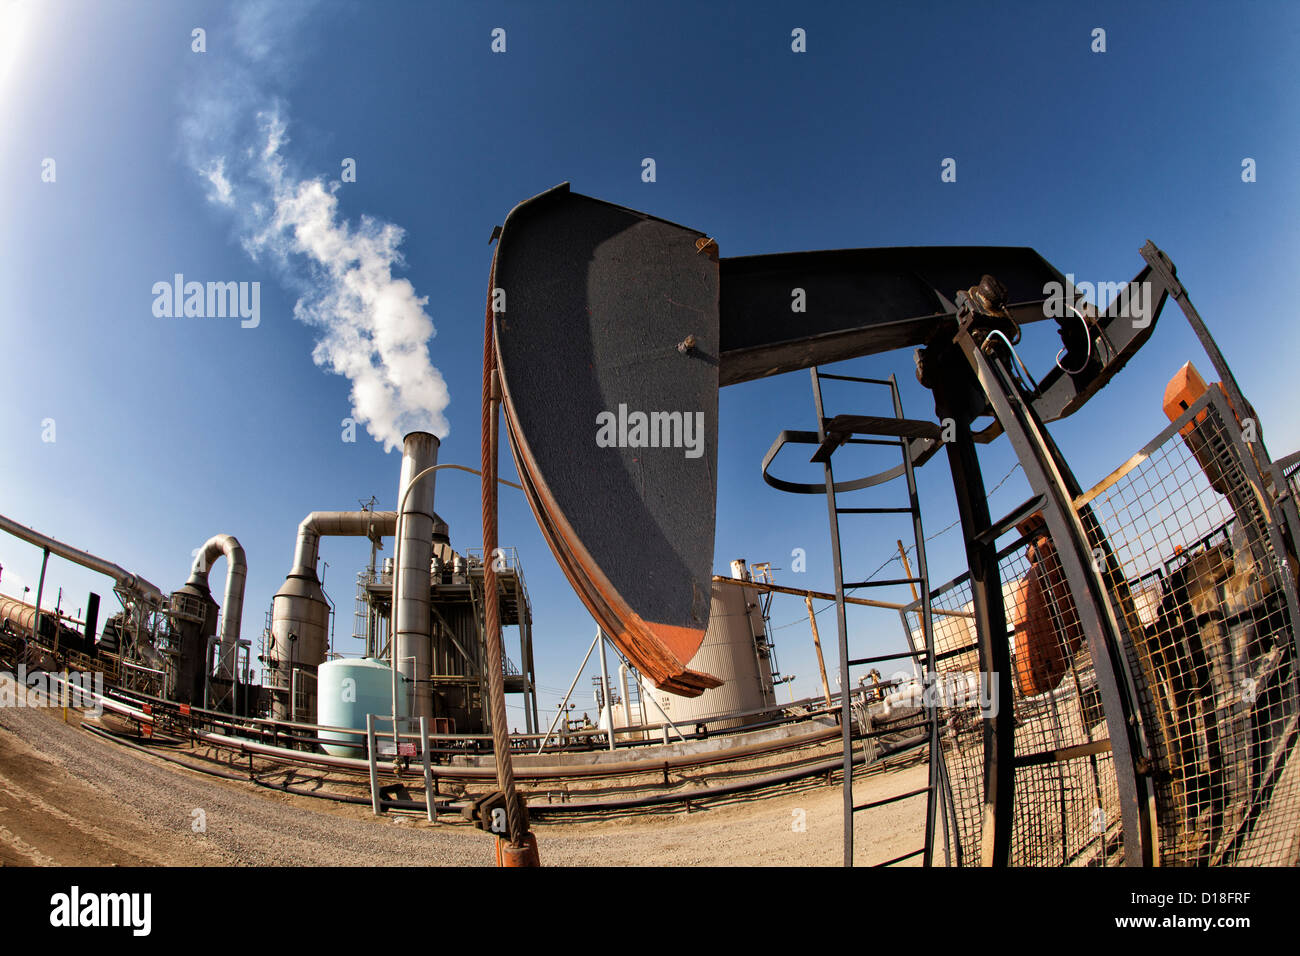 Oil pump and smoke stack in oil field Stock Photo